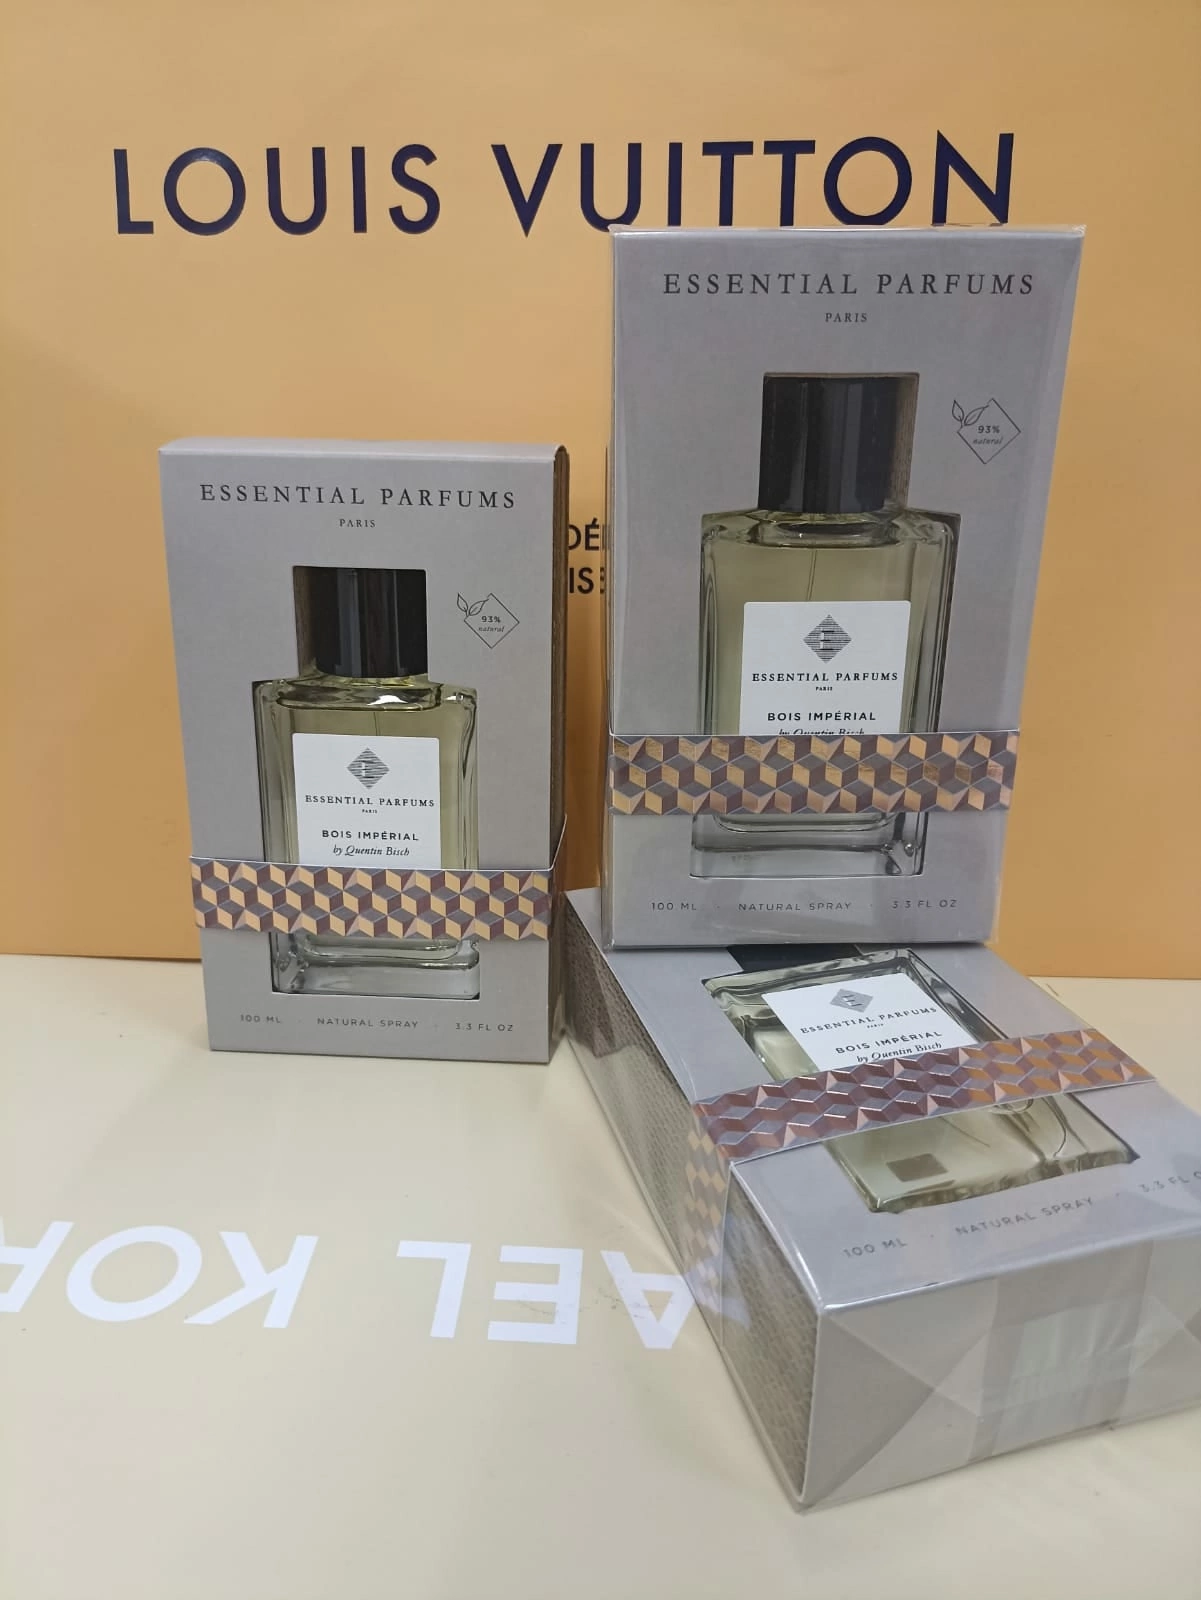 Bois imperial essential parfums limited edition. Essential Parfums bois Imperial. Essential Parfums Paris bois Imperial by Quentin bisch. Bois Impérial Essential Parfums Ноты. Essential Parfums bois Imperial by Quentin bisch EDP 10 ml.